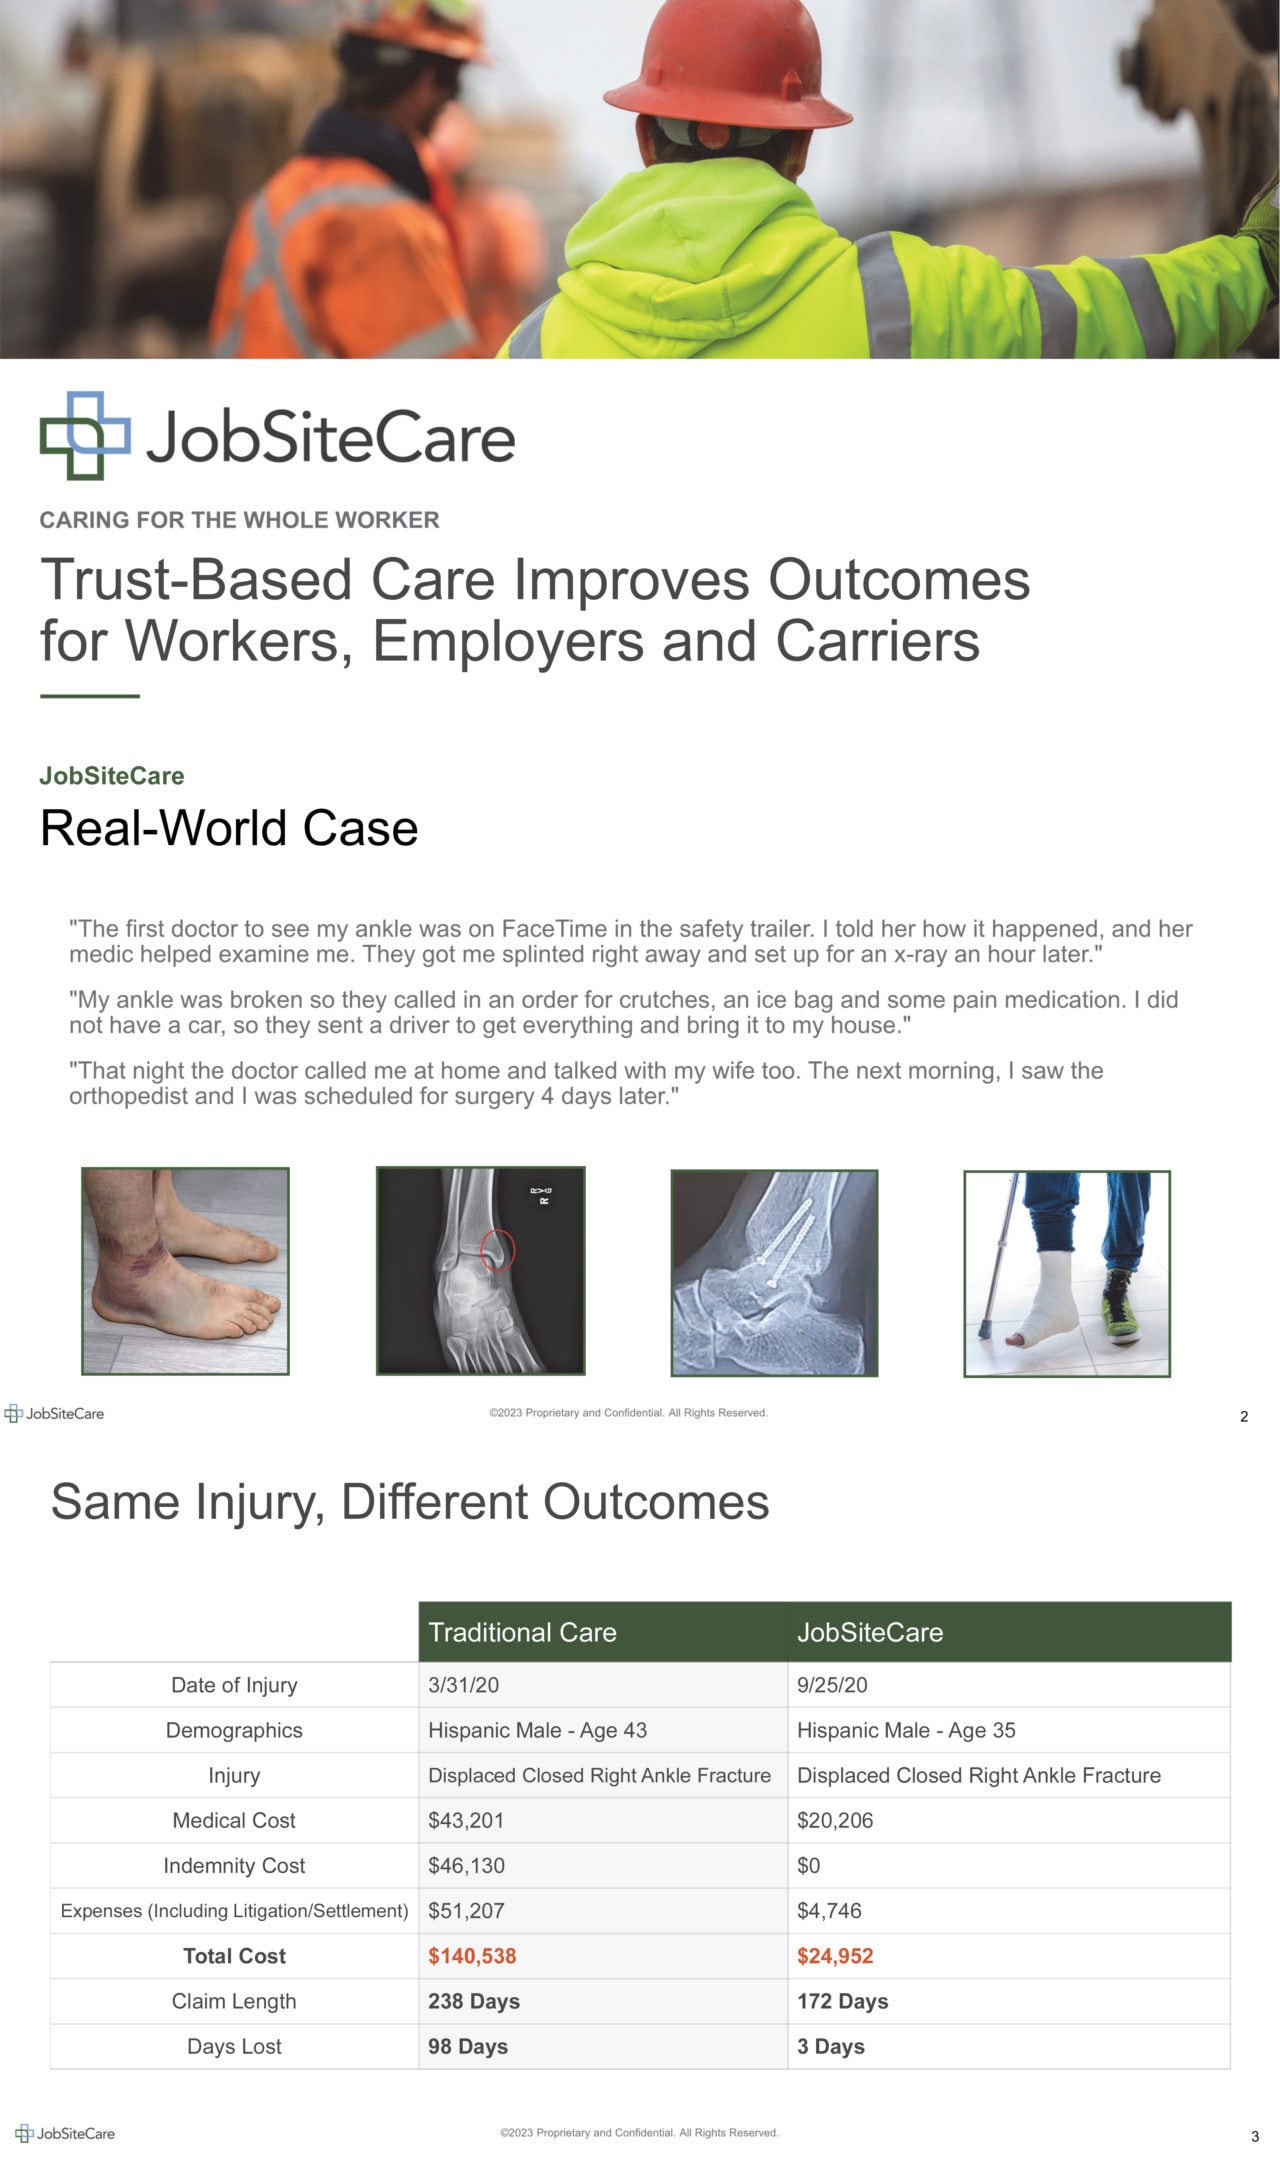 Outcome Measures of Trust-Based Telemedicine for Workers’ Compensation